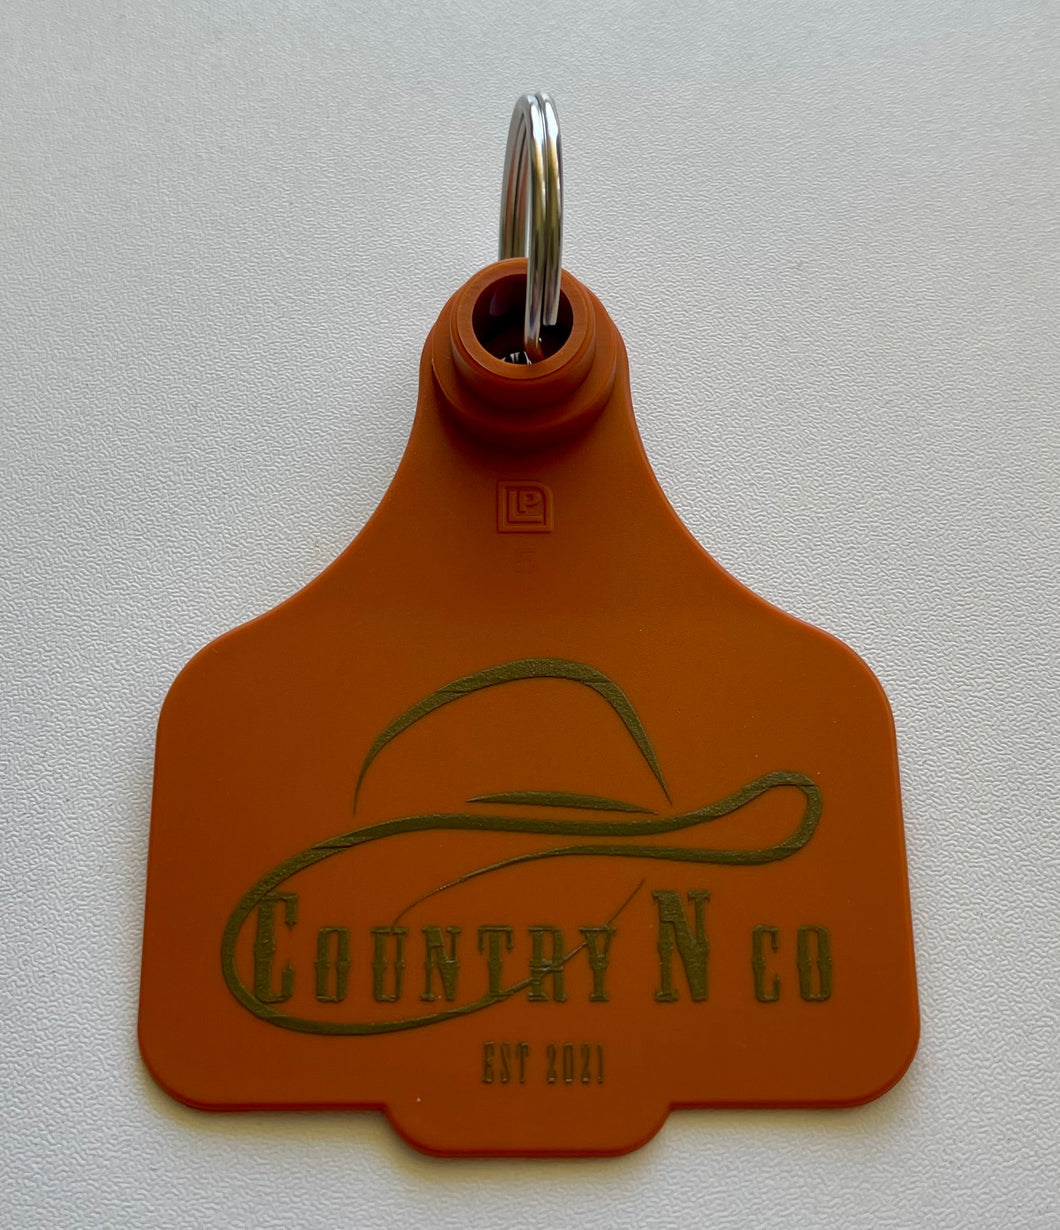 Keyring - Cattle tags